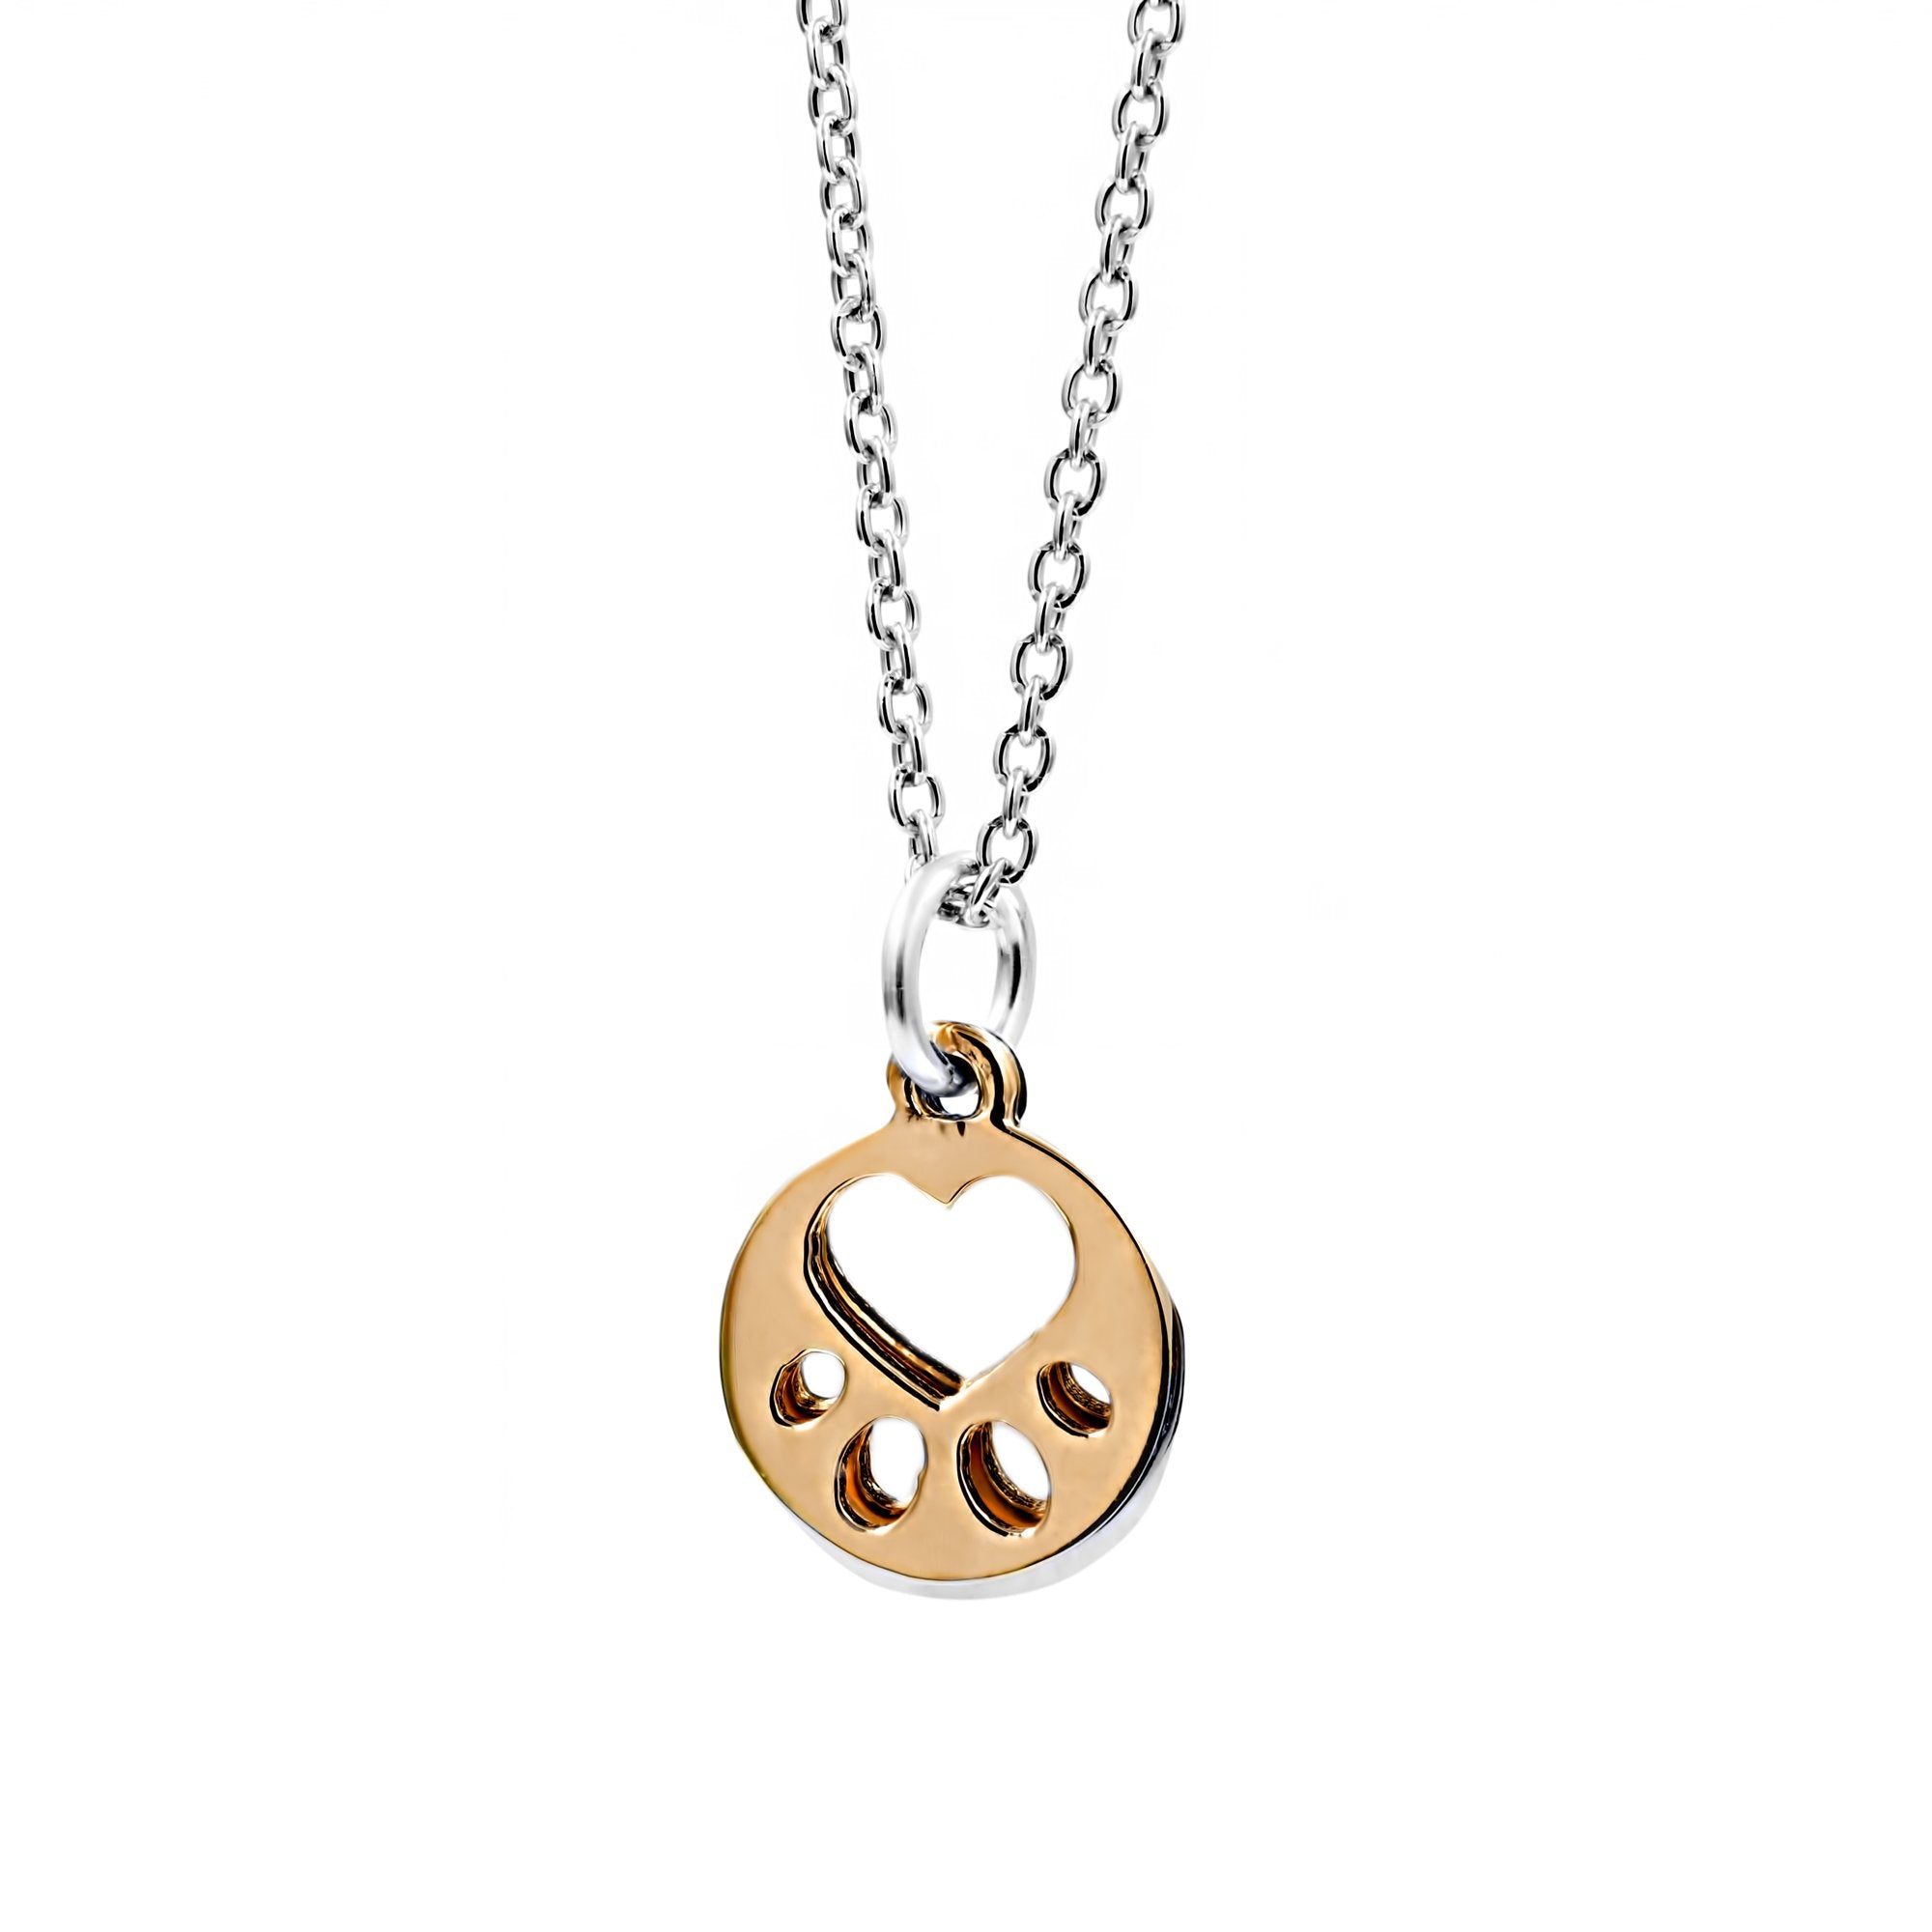 Our Cause for Paws 14k Gold and Sterling Silver Small Paw Pendant Necklace